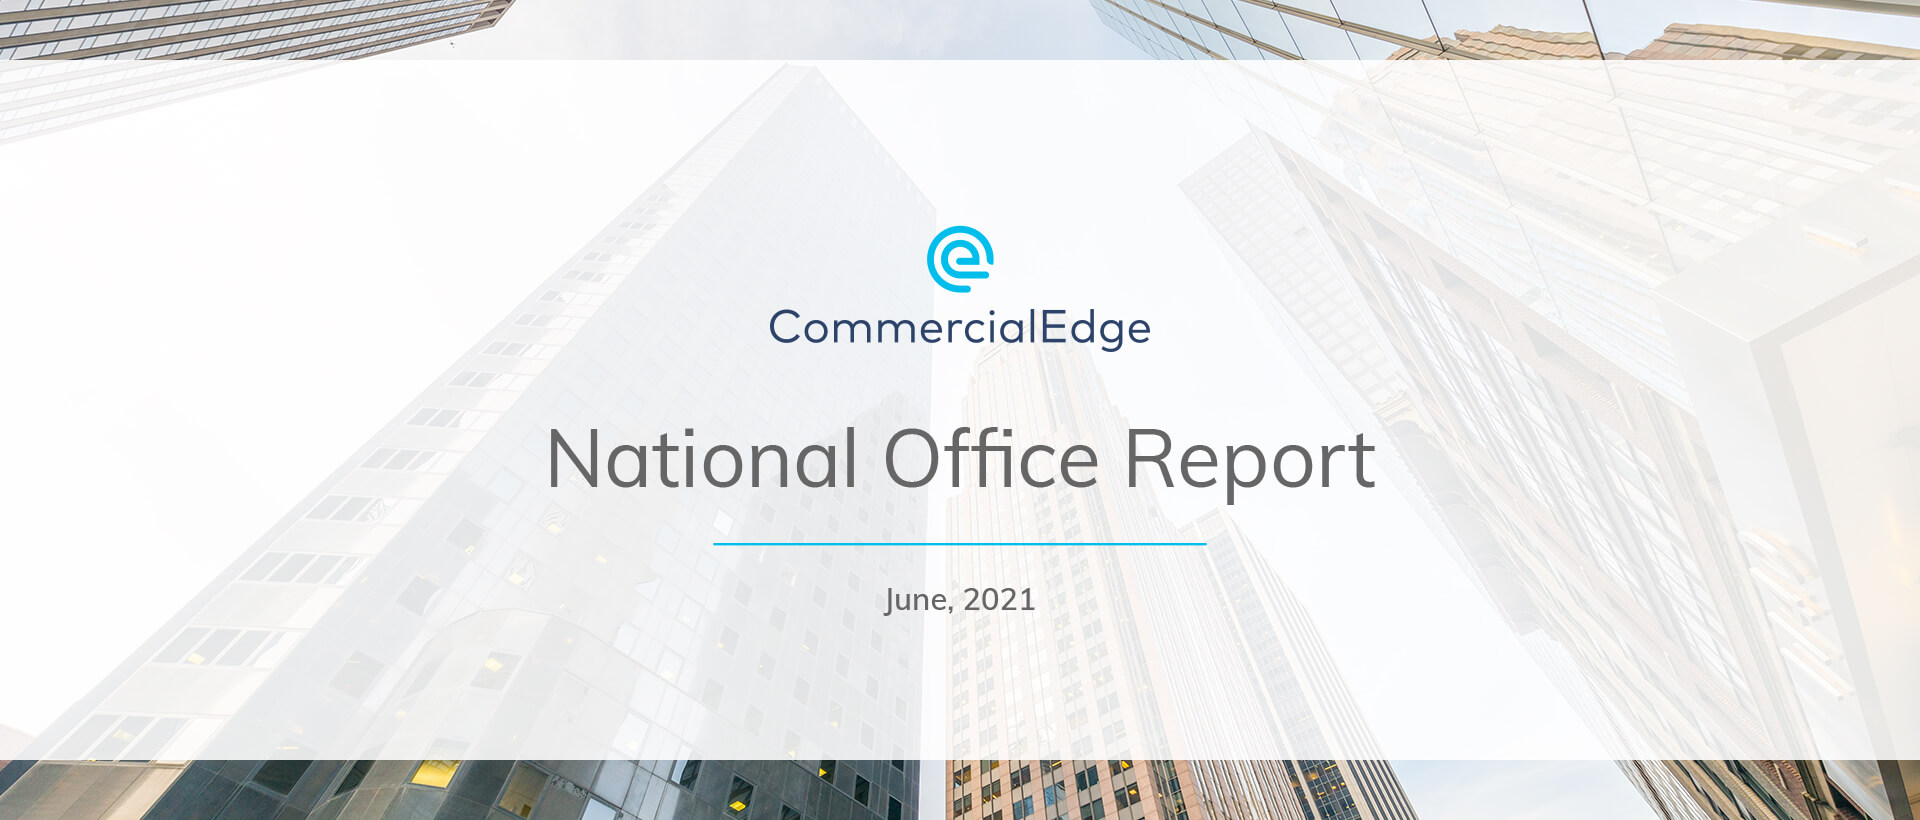 CommercialEdge Office National Report June 2021